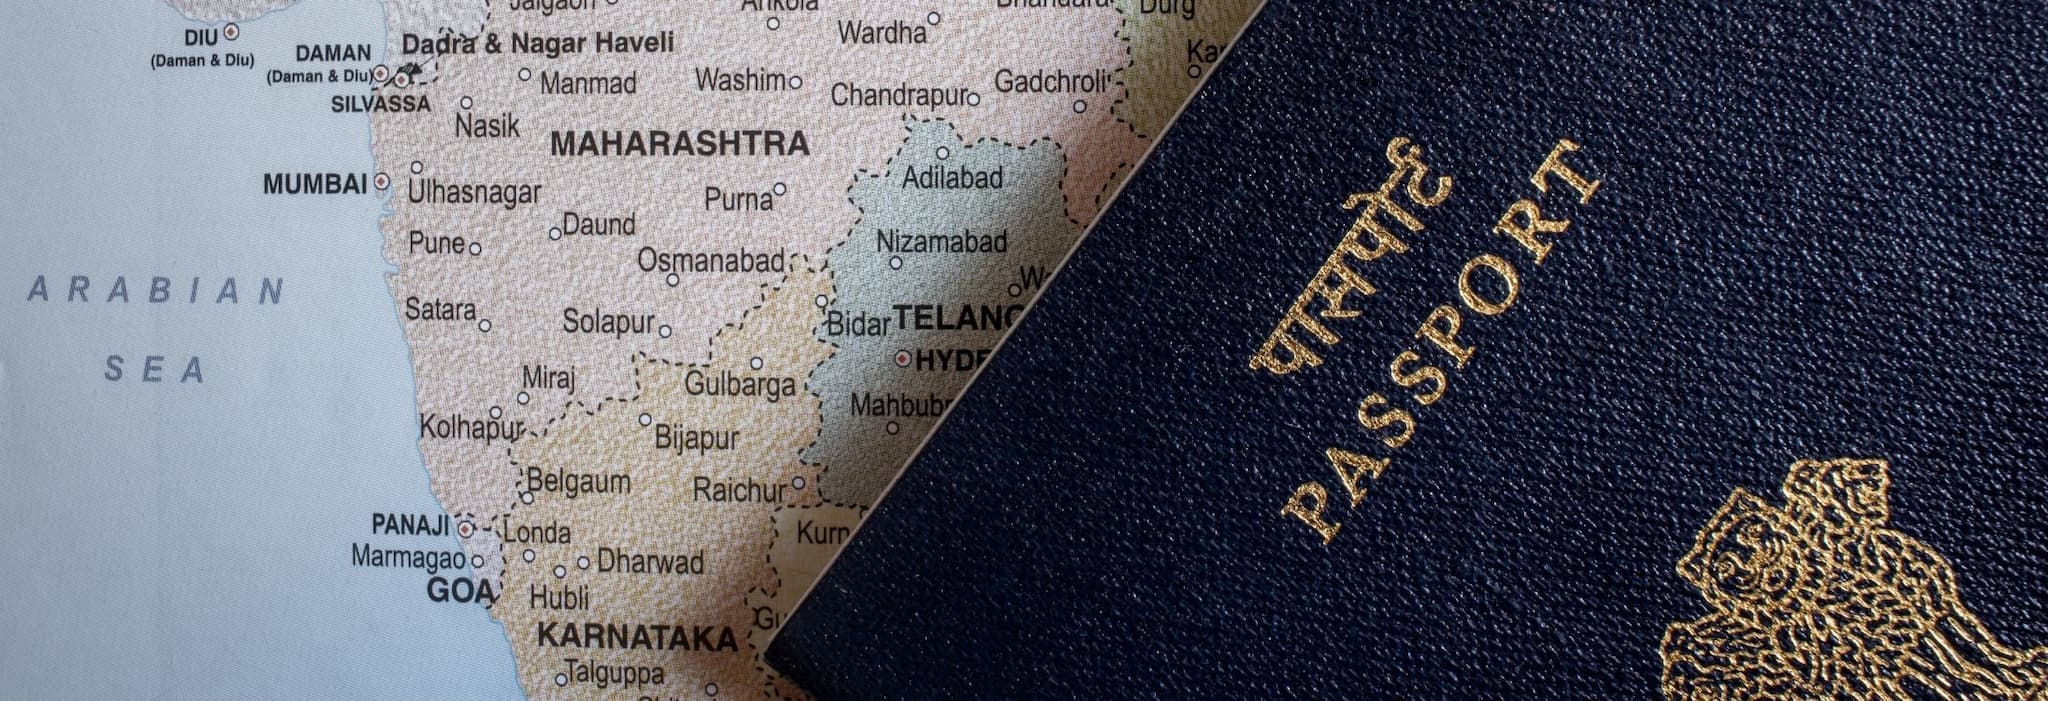 Worlds Most Powerful Passports In 2020 Indias Ranking Drops 1478